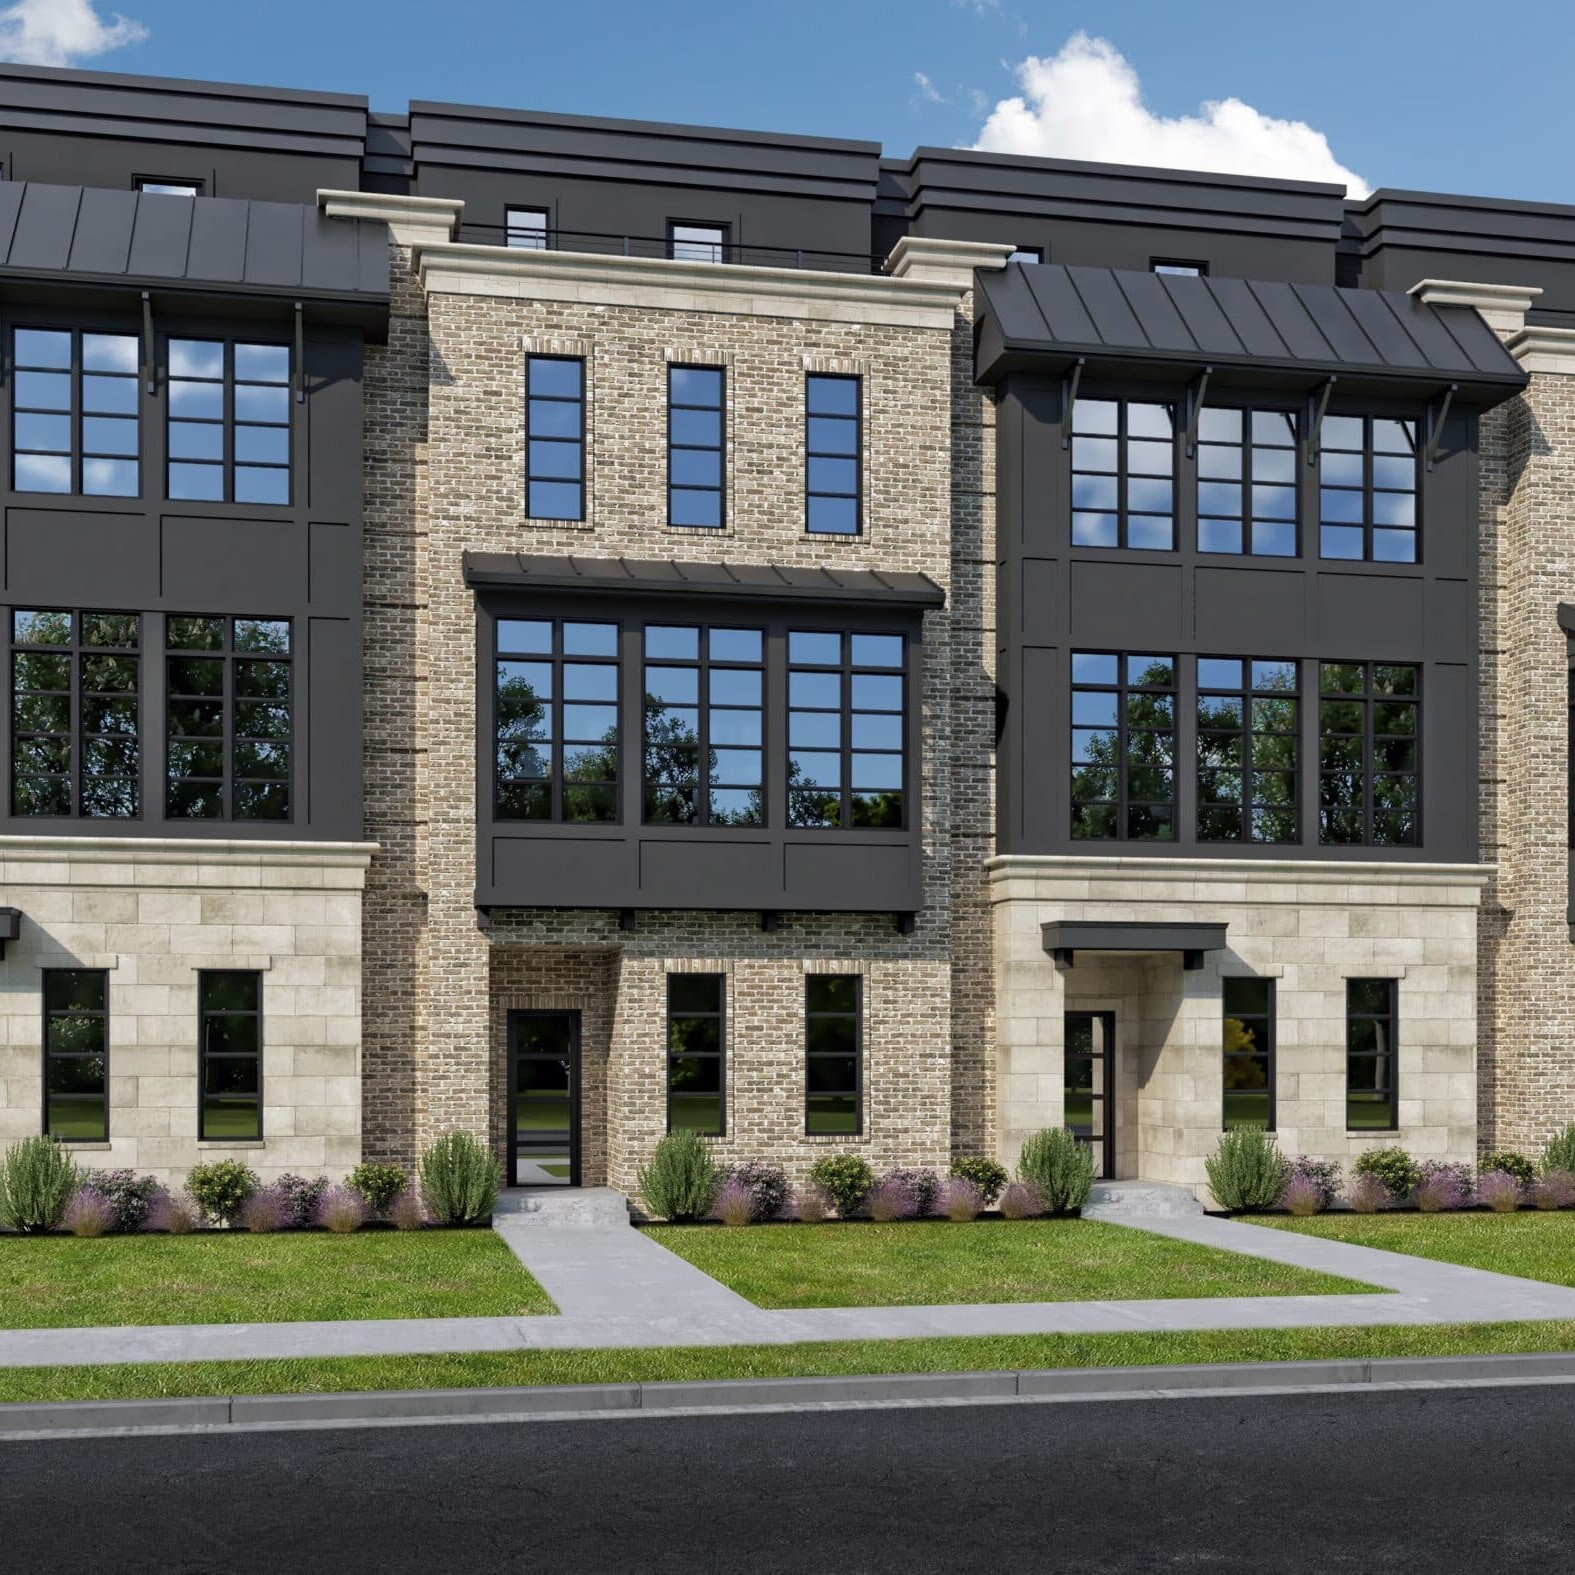 A rendering of a luxury three-story townhouse by a custom home builder in Carmel Indiana.